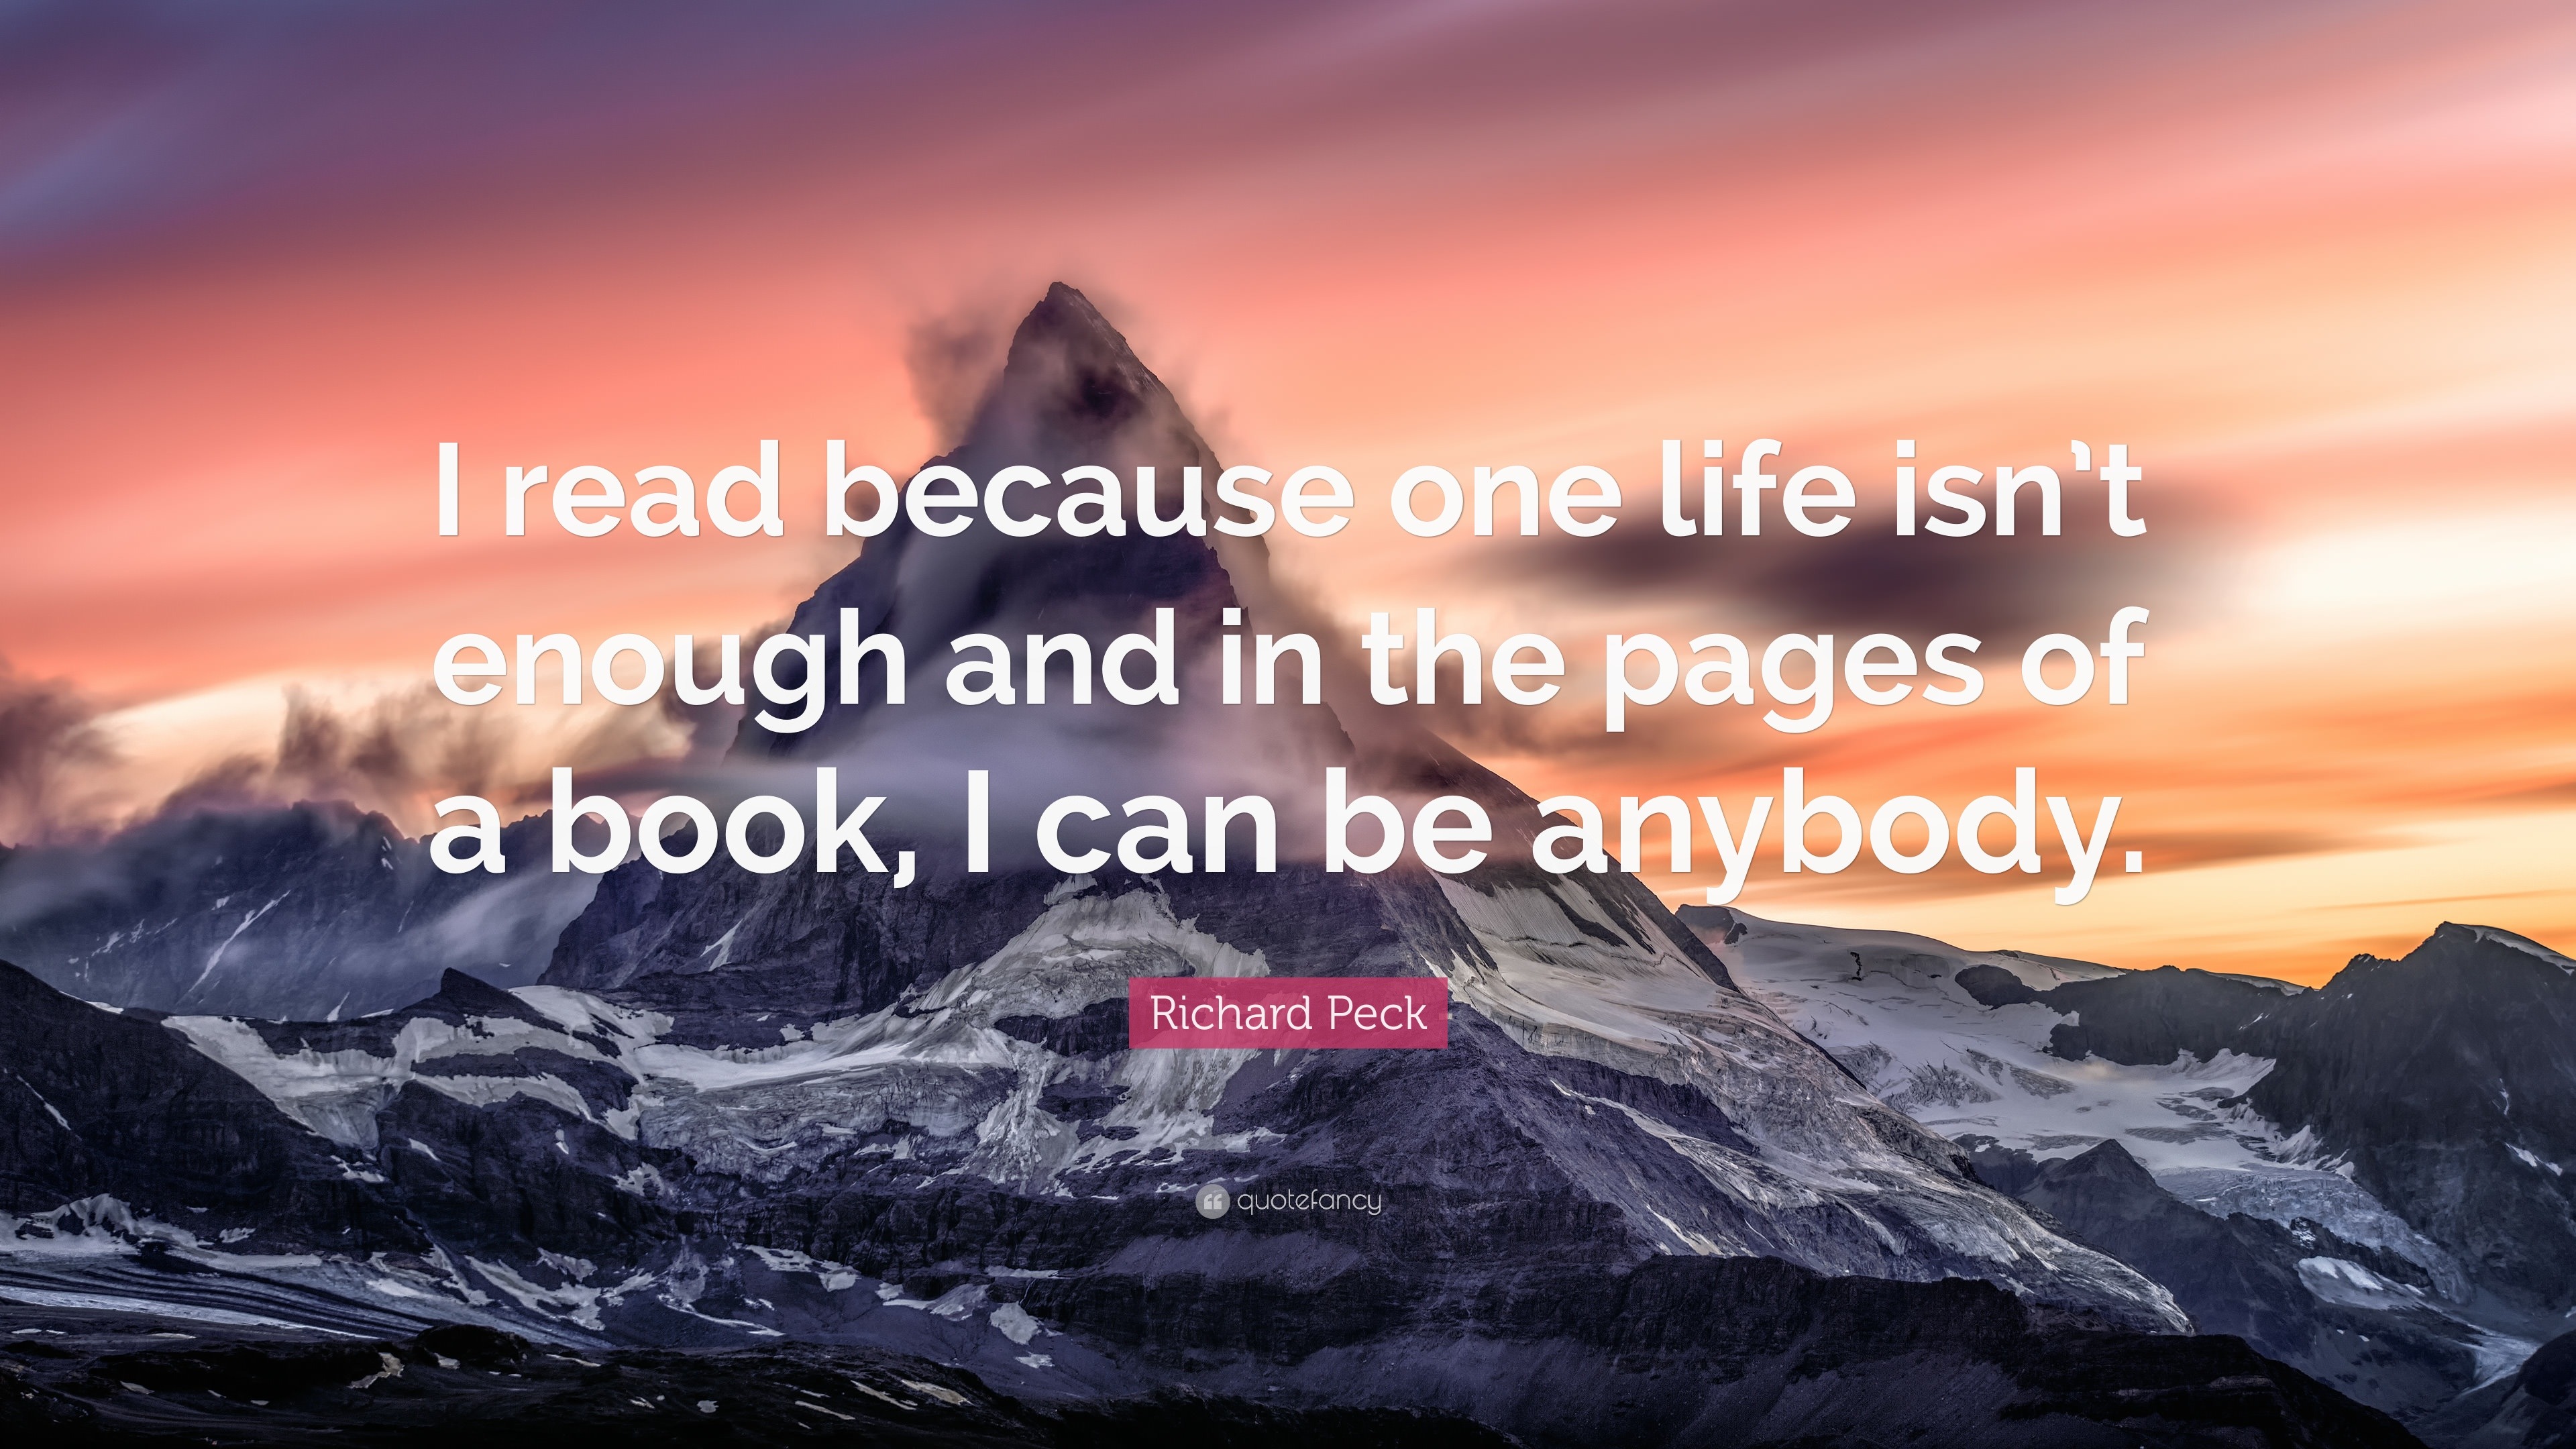 Richard Peck Quote: “I read because one life isn’t enough and in the ...